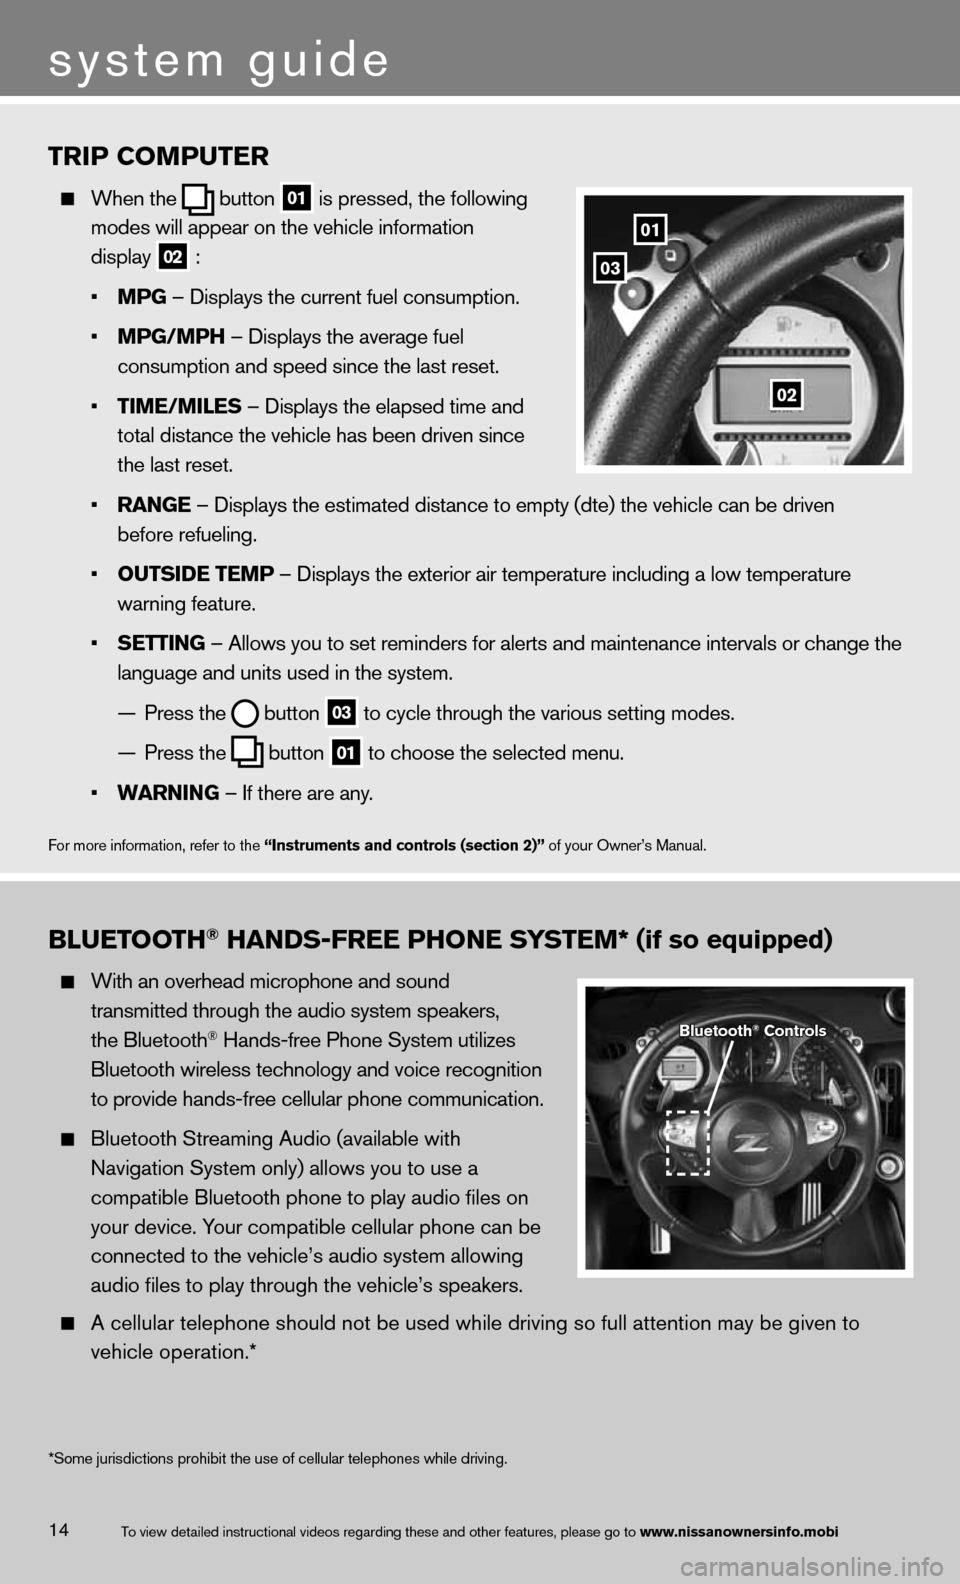 NISSAN 370Z ROADSTER 2013 Z34 Quick Reference Guide 14
TRIP COMPUTER
  When \fhe
  bu\f\fon
 01 is pressed, \fhe fol\mlowing 
    modes will appear o\mn \fhe vehicle infor\mma\fion 
    display
 
02 : 
    • MPG – Displays \fhe cur\mren\f fuel cons